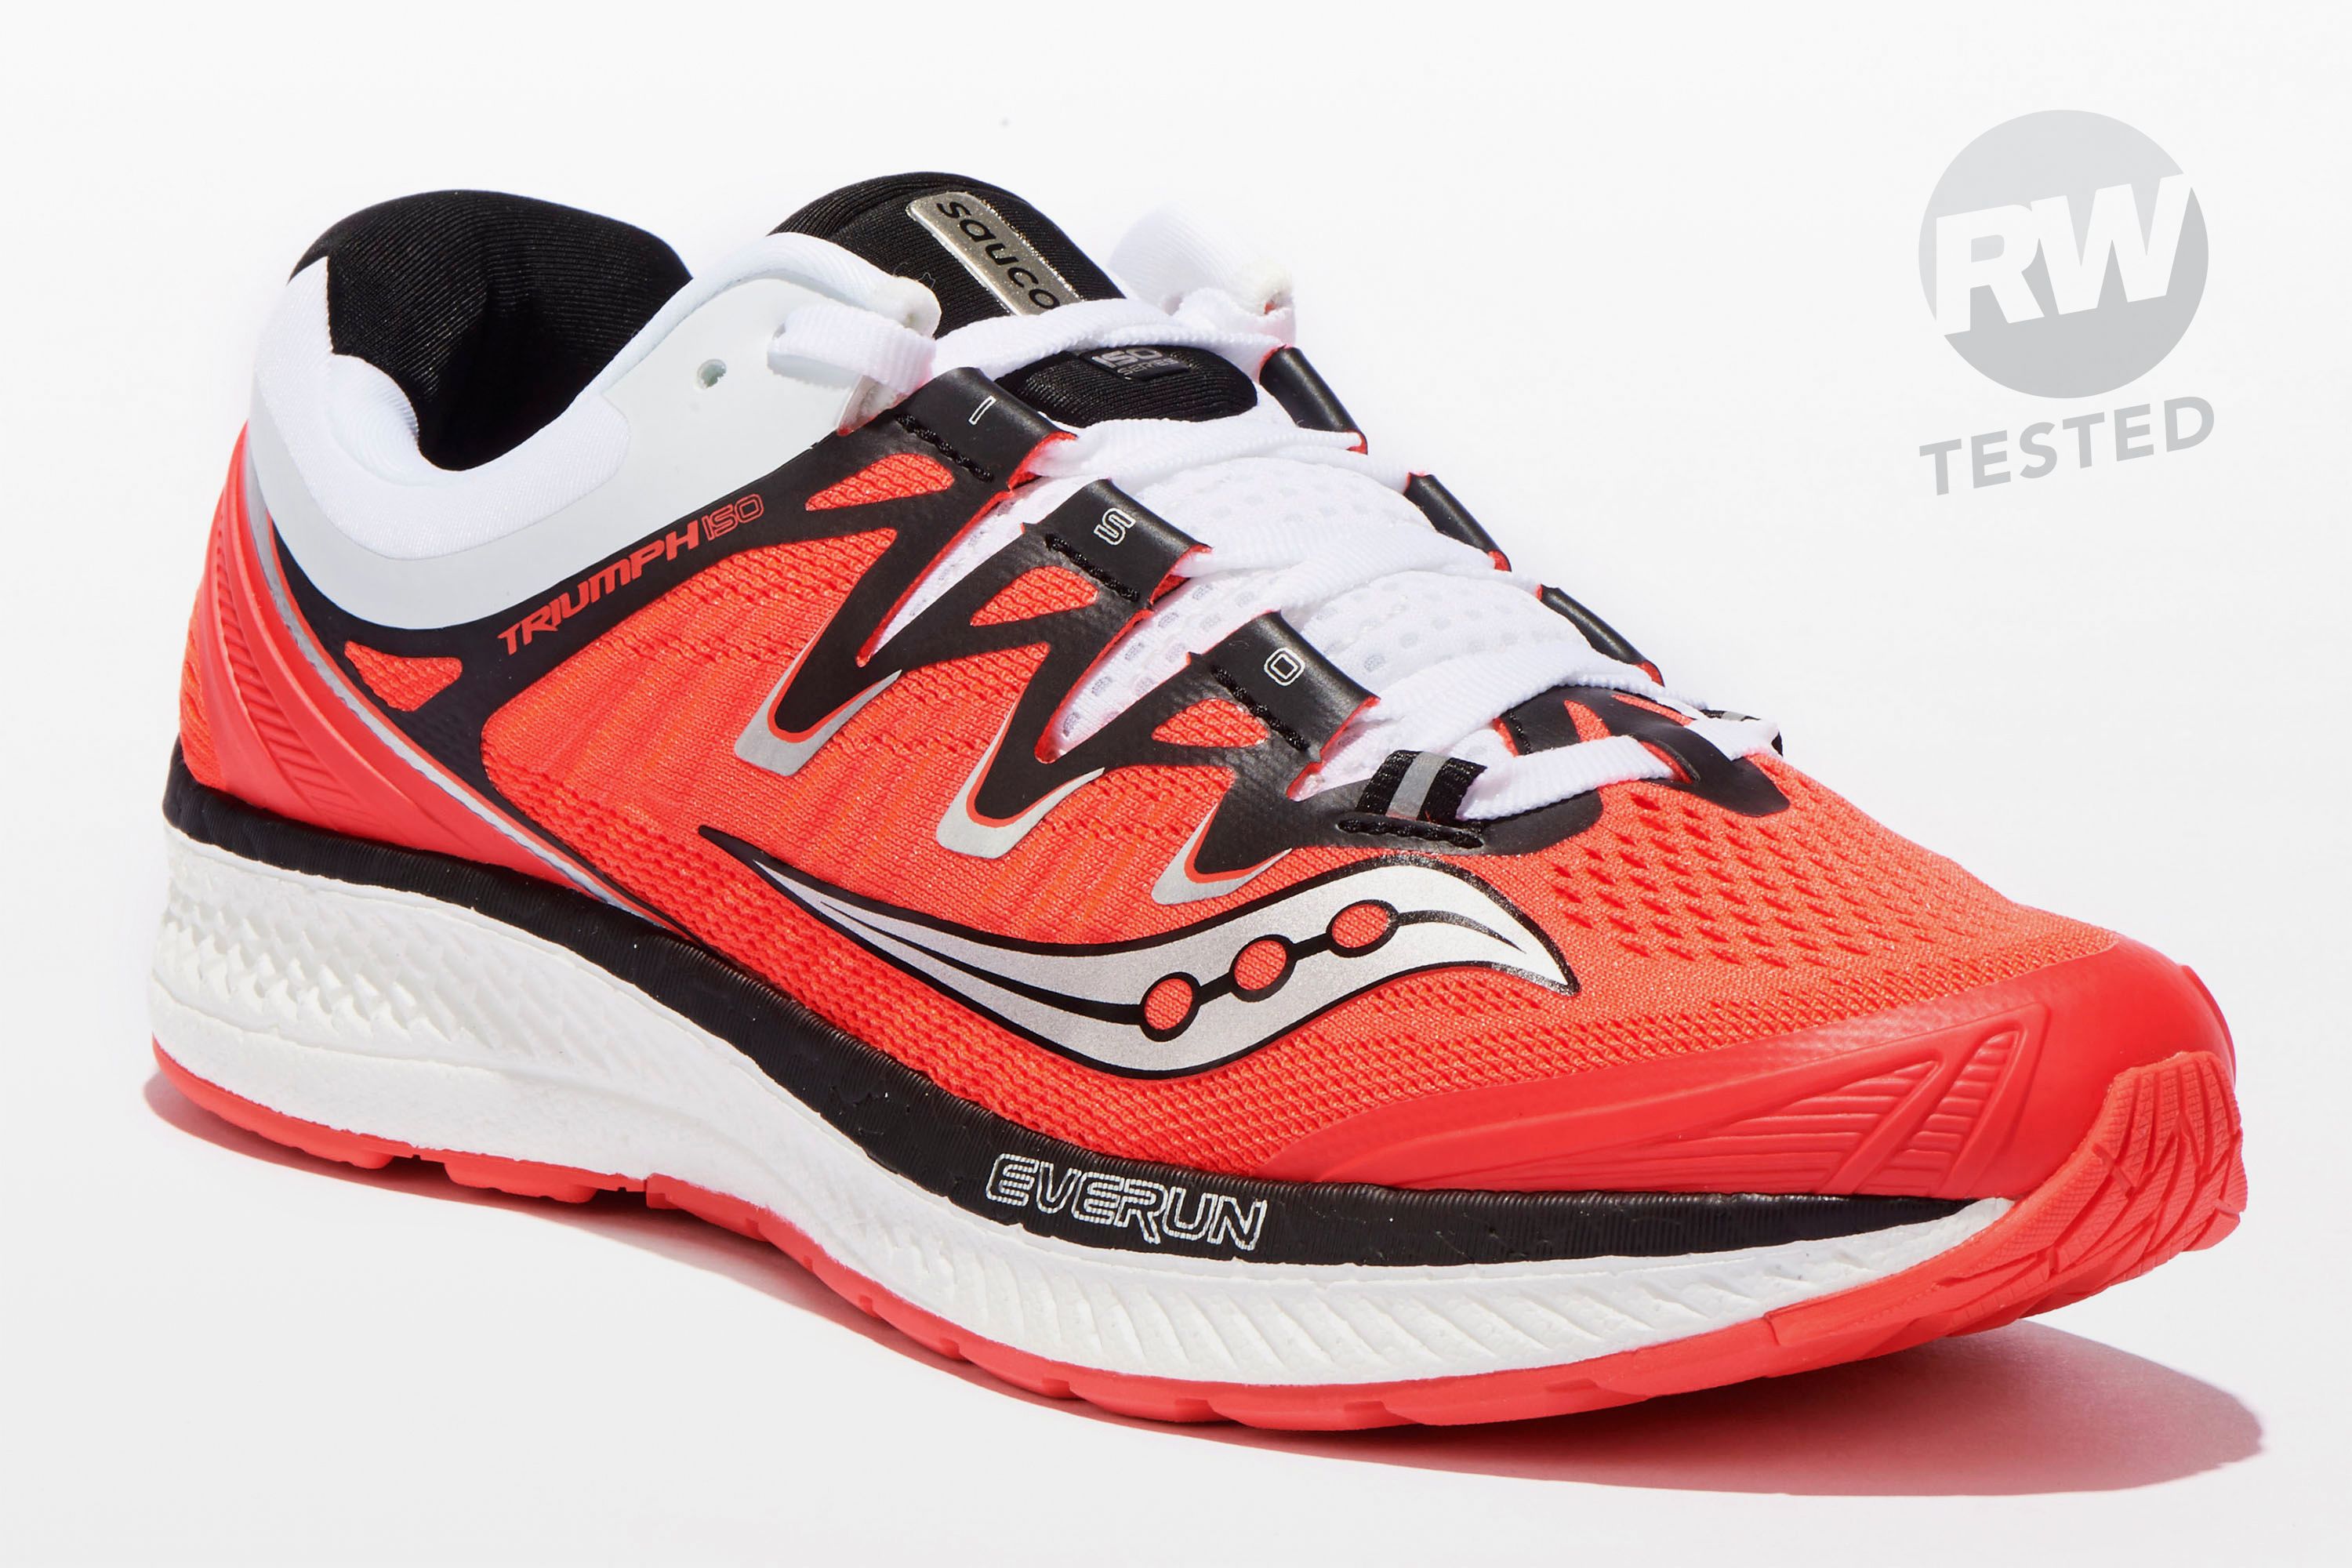 behang gewelddadig kogel Saucony Triumph ISO 4 Review | Cushioned Running Shoes